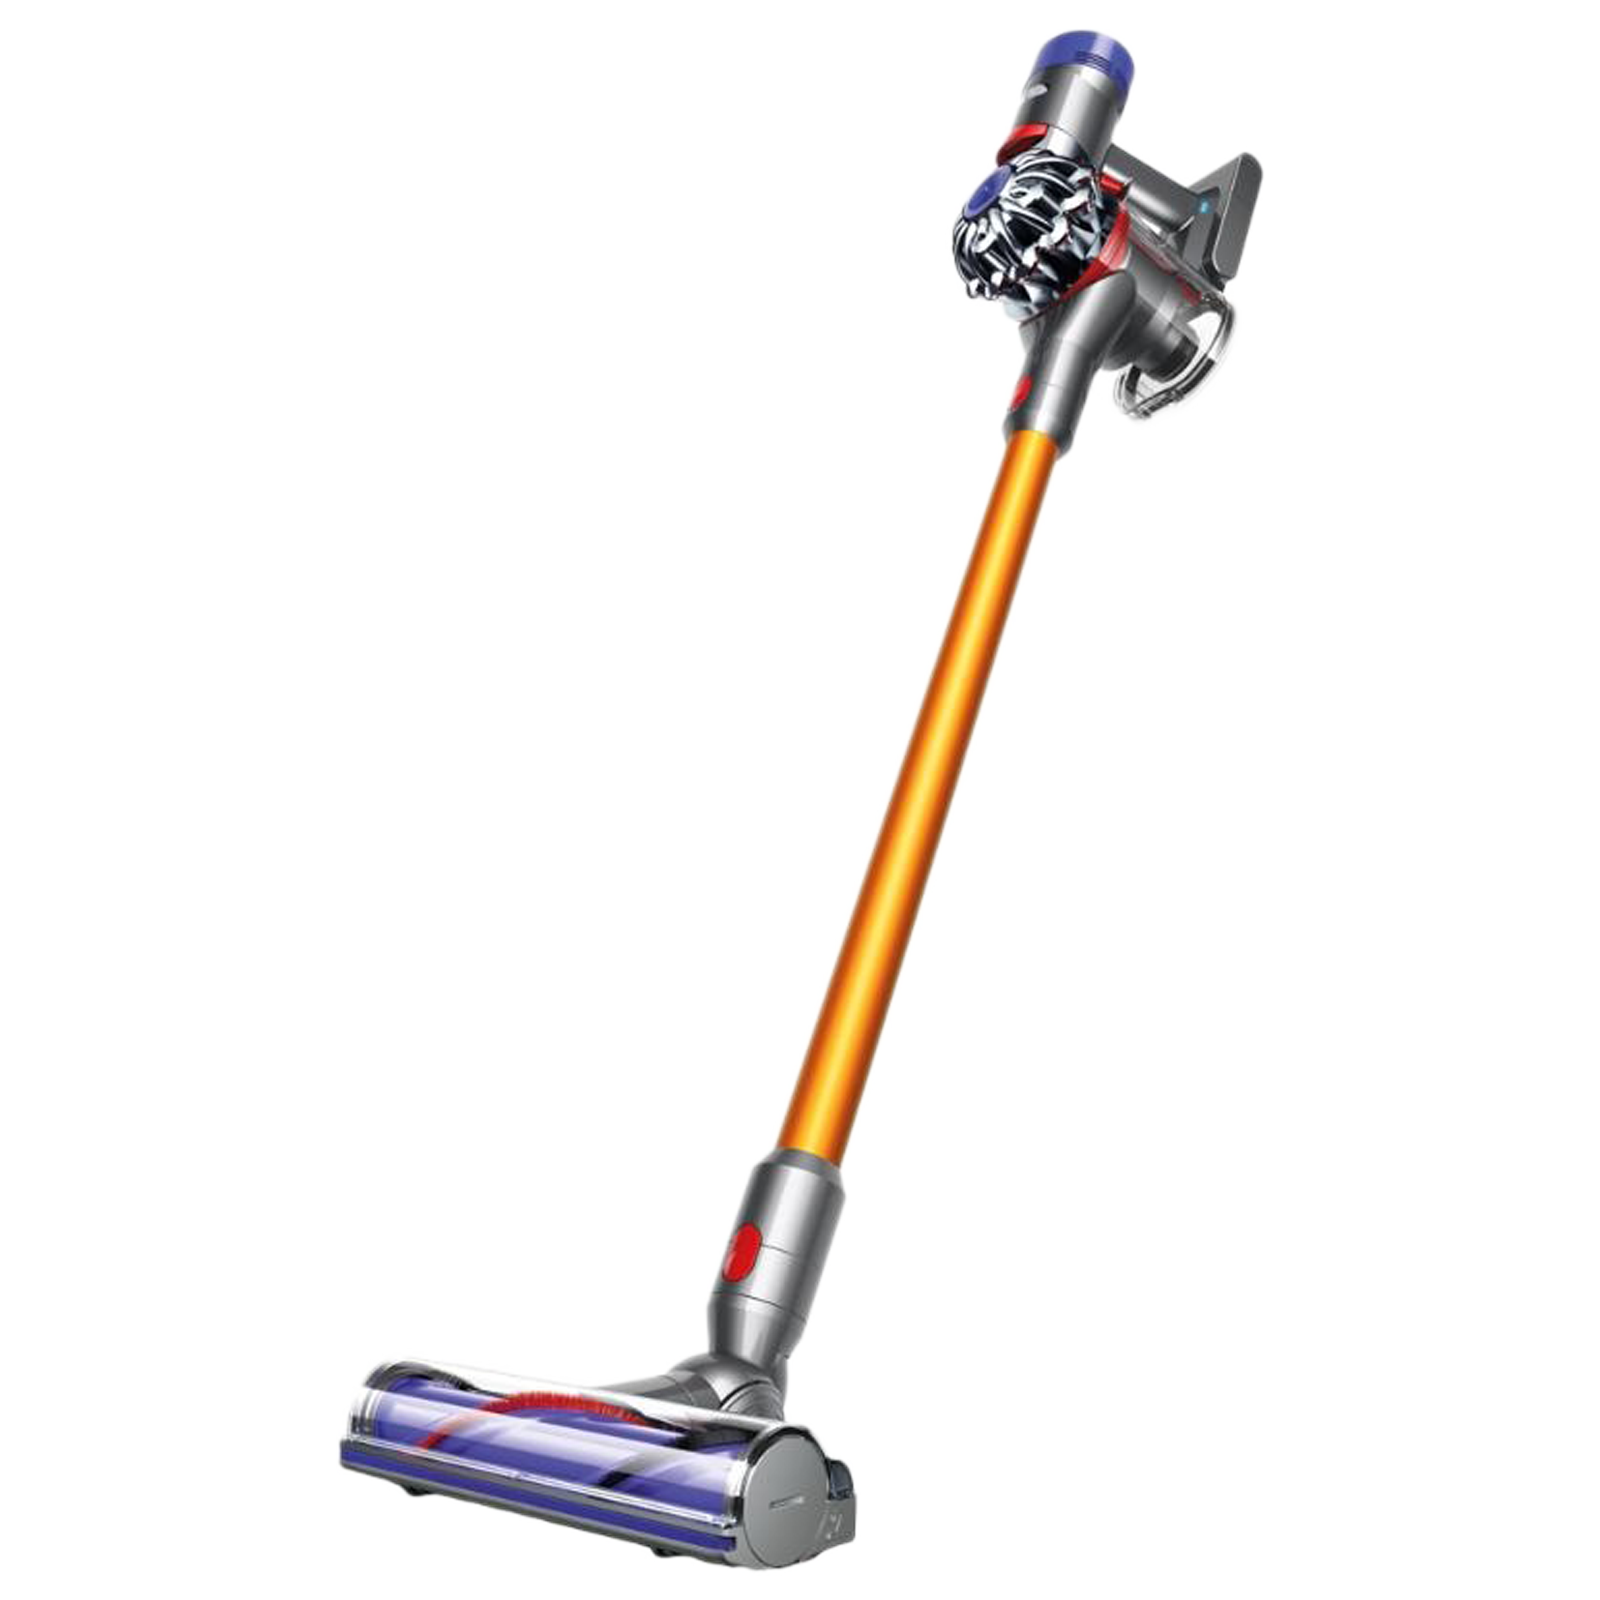 Dyson V8 Absolute 115 Air Watts Cordless Vacuum Cleaner (0.54 Liter Tank, 381353-01, Nickel/Yellow)